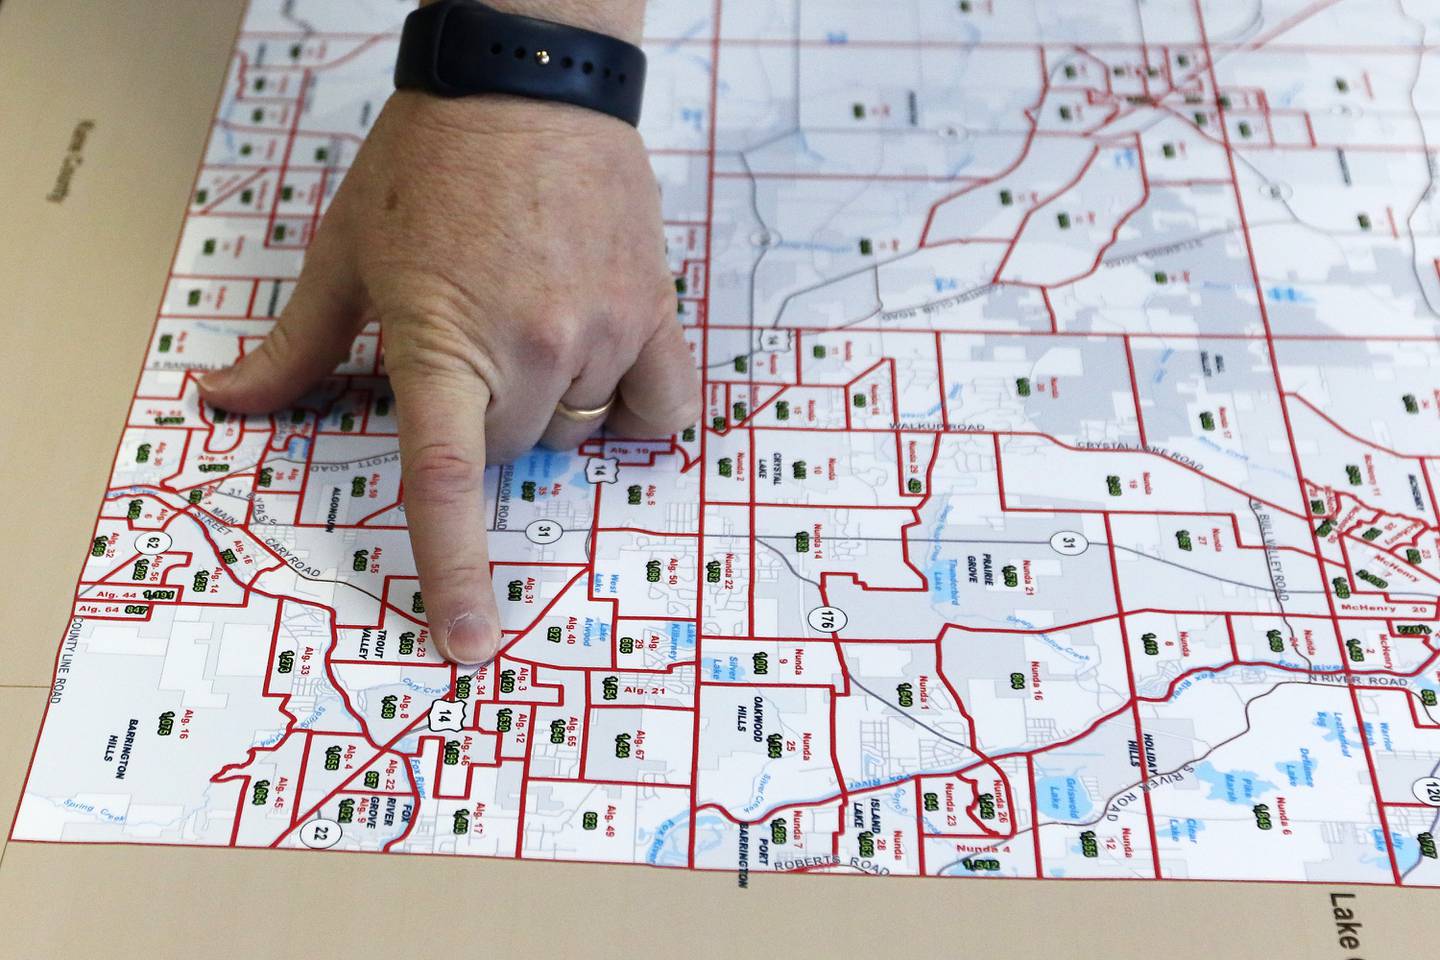 McHenry County board member Joe Gottemoller shows a current map of McHenry County voter districts and precincts on Friday, April 30, 2021 in Crystal Lake. The county is considering redistricting and is awaiting updated census information.